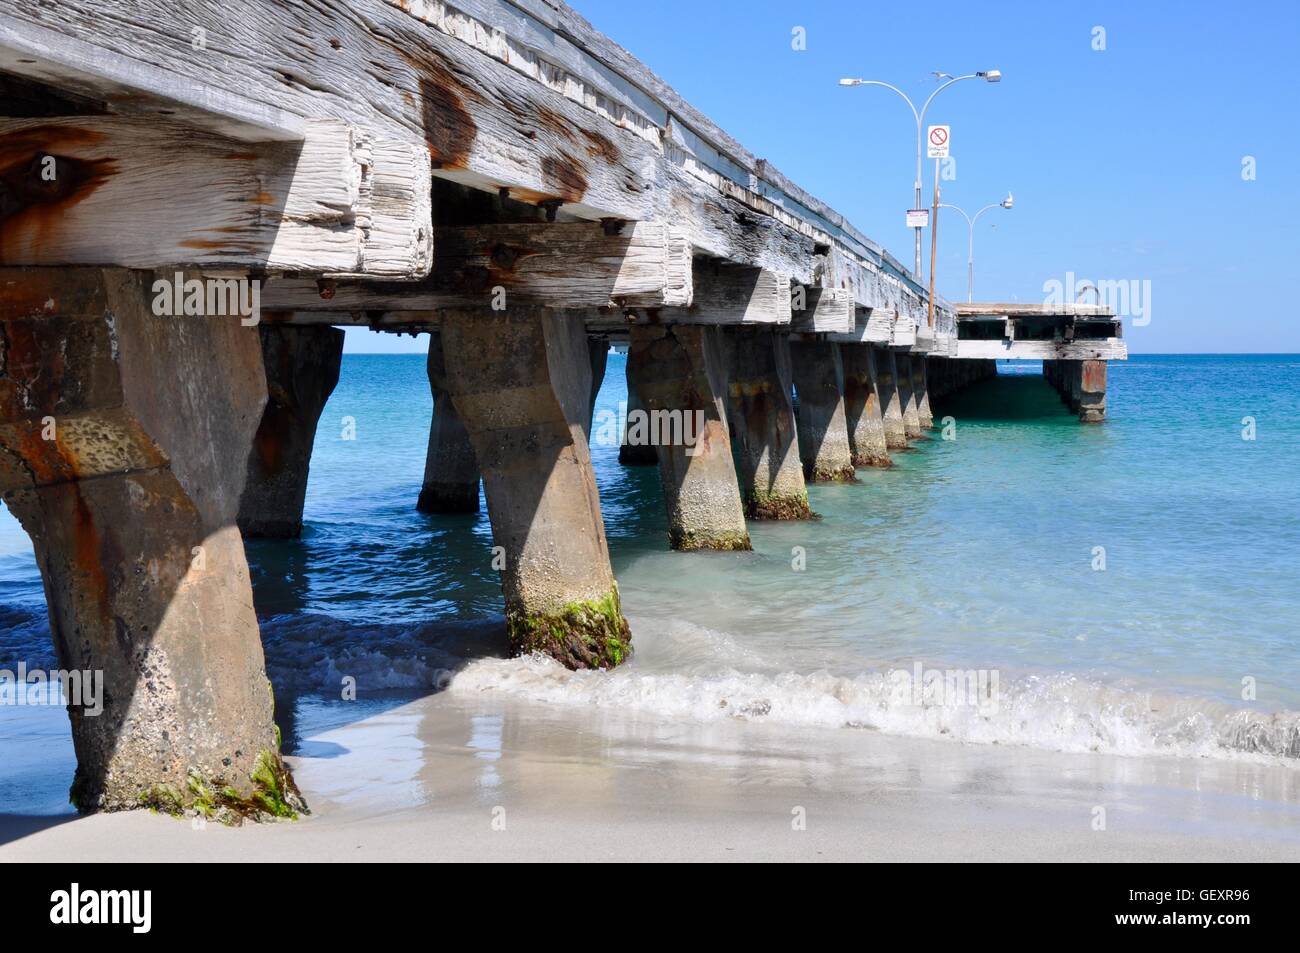 Coogee Beach jetty structure with turquoise Indian Ocean waters under a clear blue sky in Coogee, Western Australia. Stock Photo